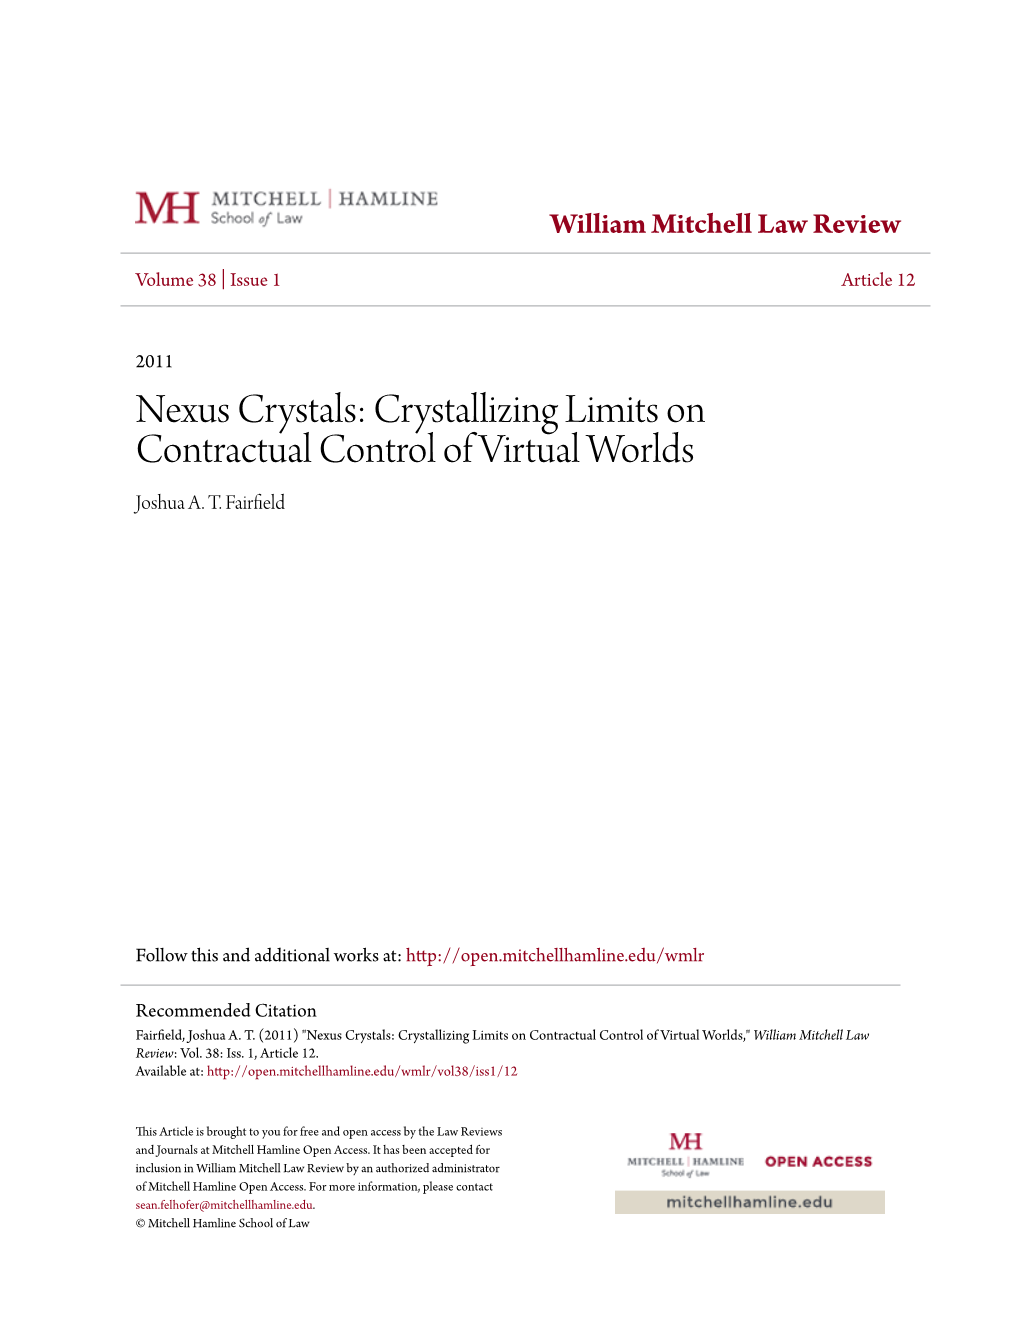 Crystallizing Limits on Contractual Control of Virtual Worlds Joshua A